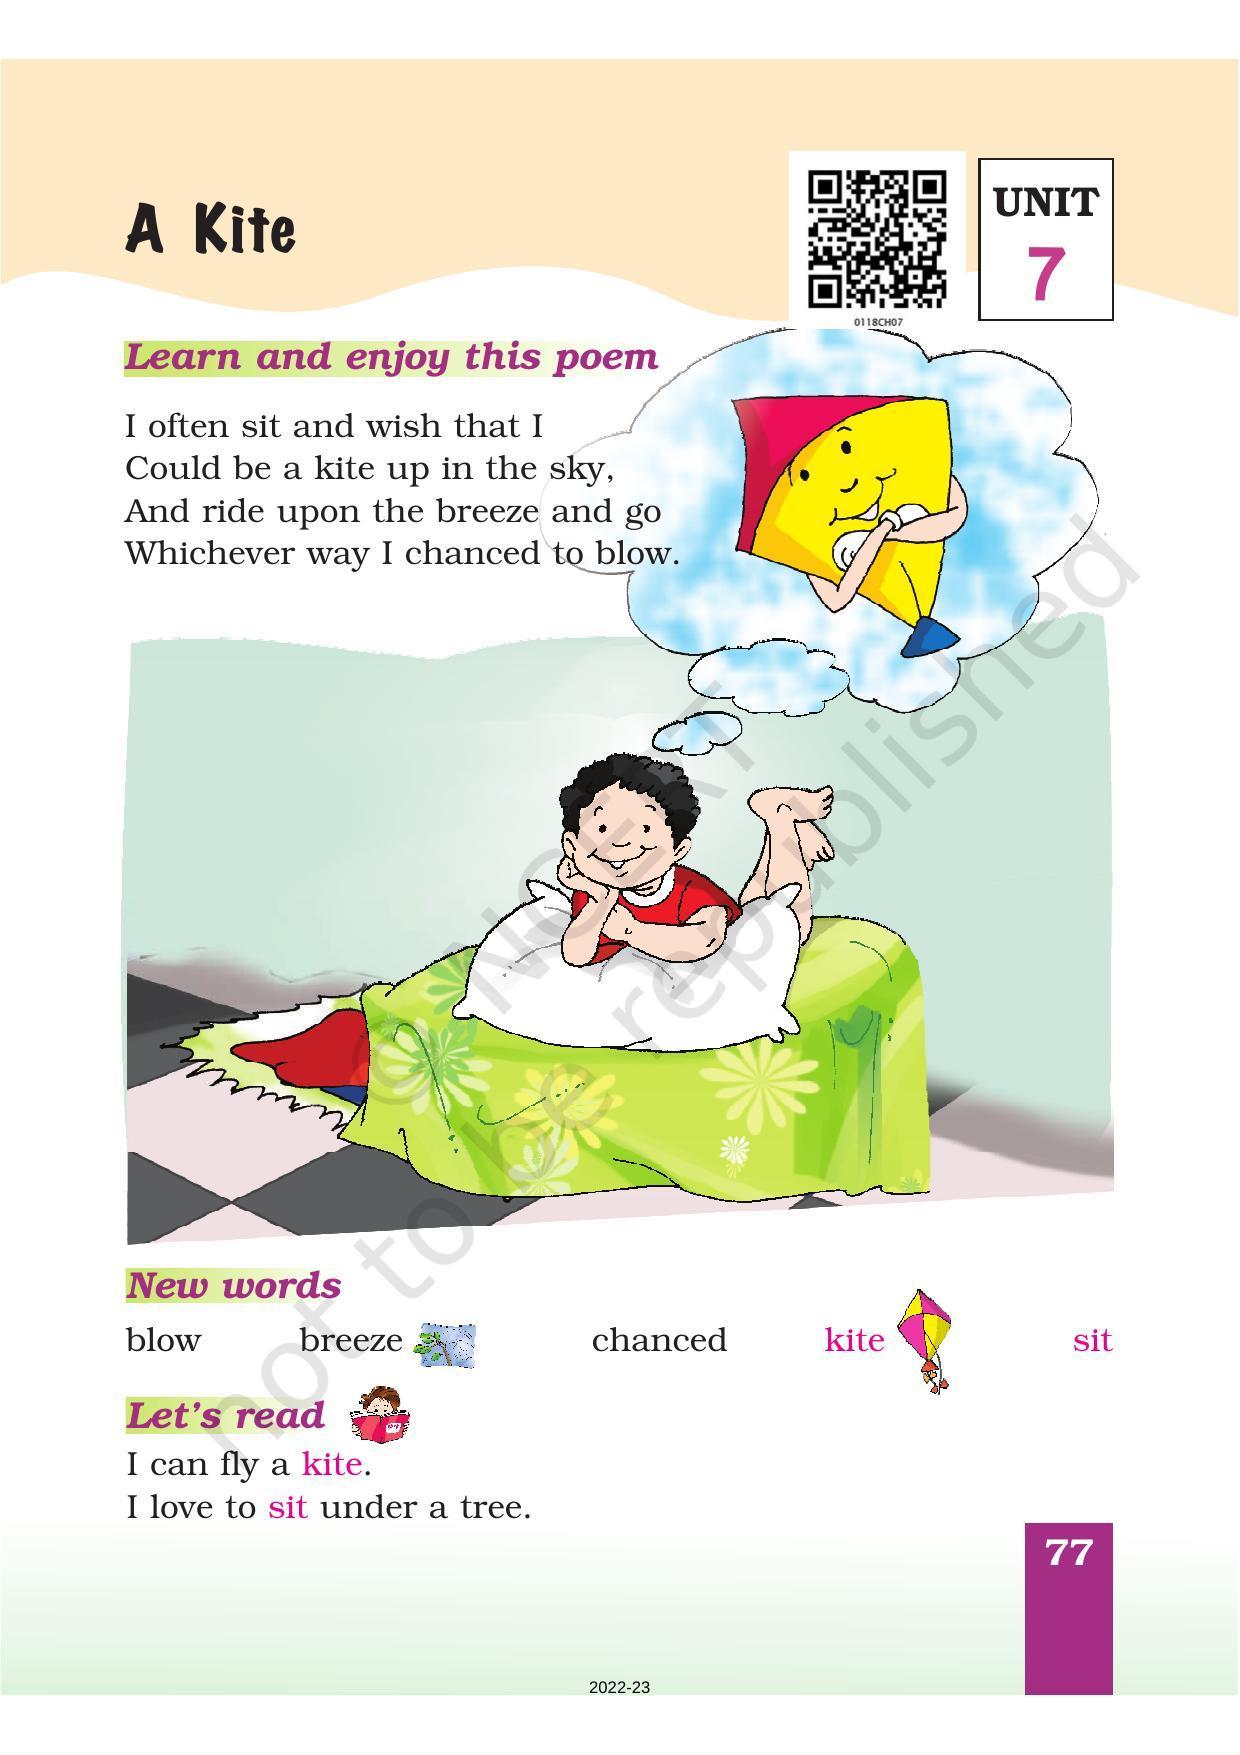 NCERT Book for Class 1 English (Marigold):Unit 7 Poem-A Kite - Page 1